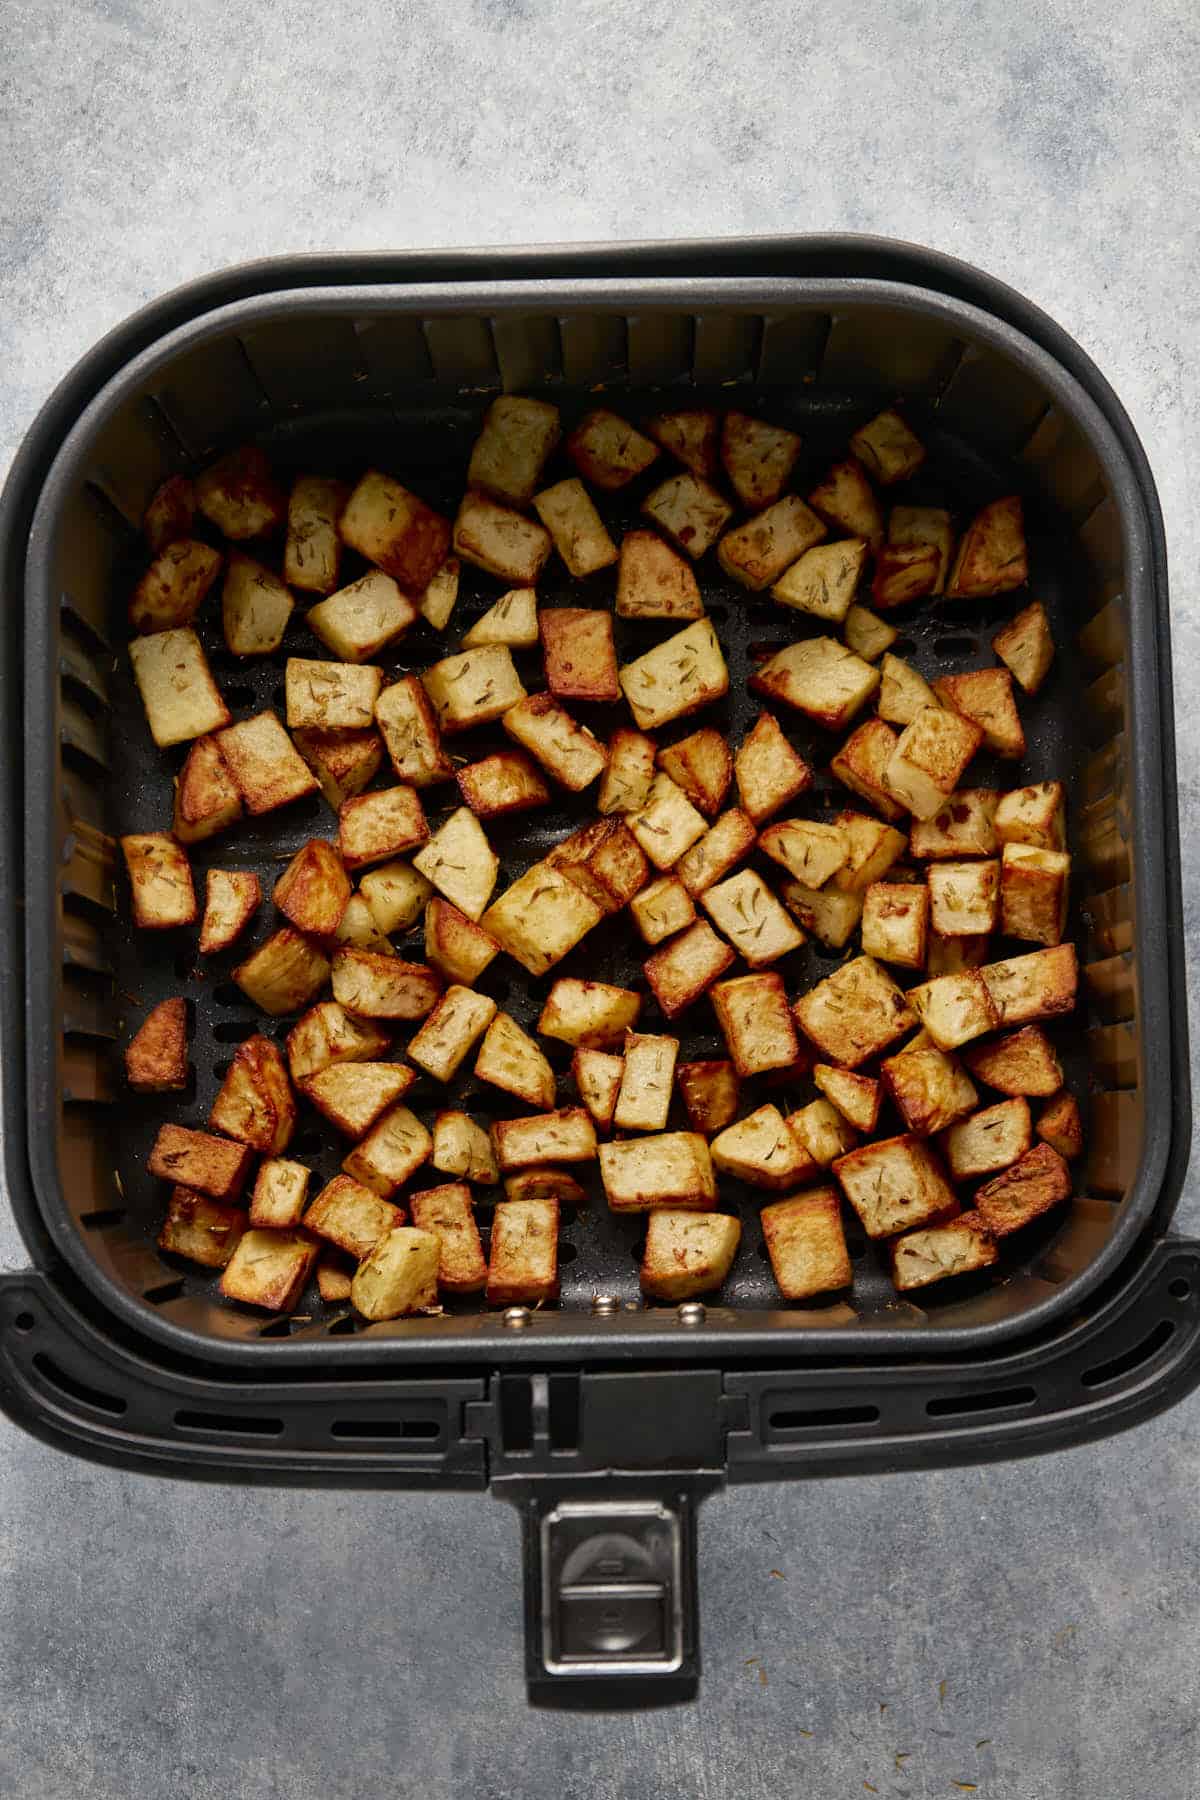 Crispy potato cubes in the air fryer basket after cooking.